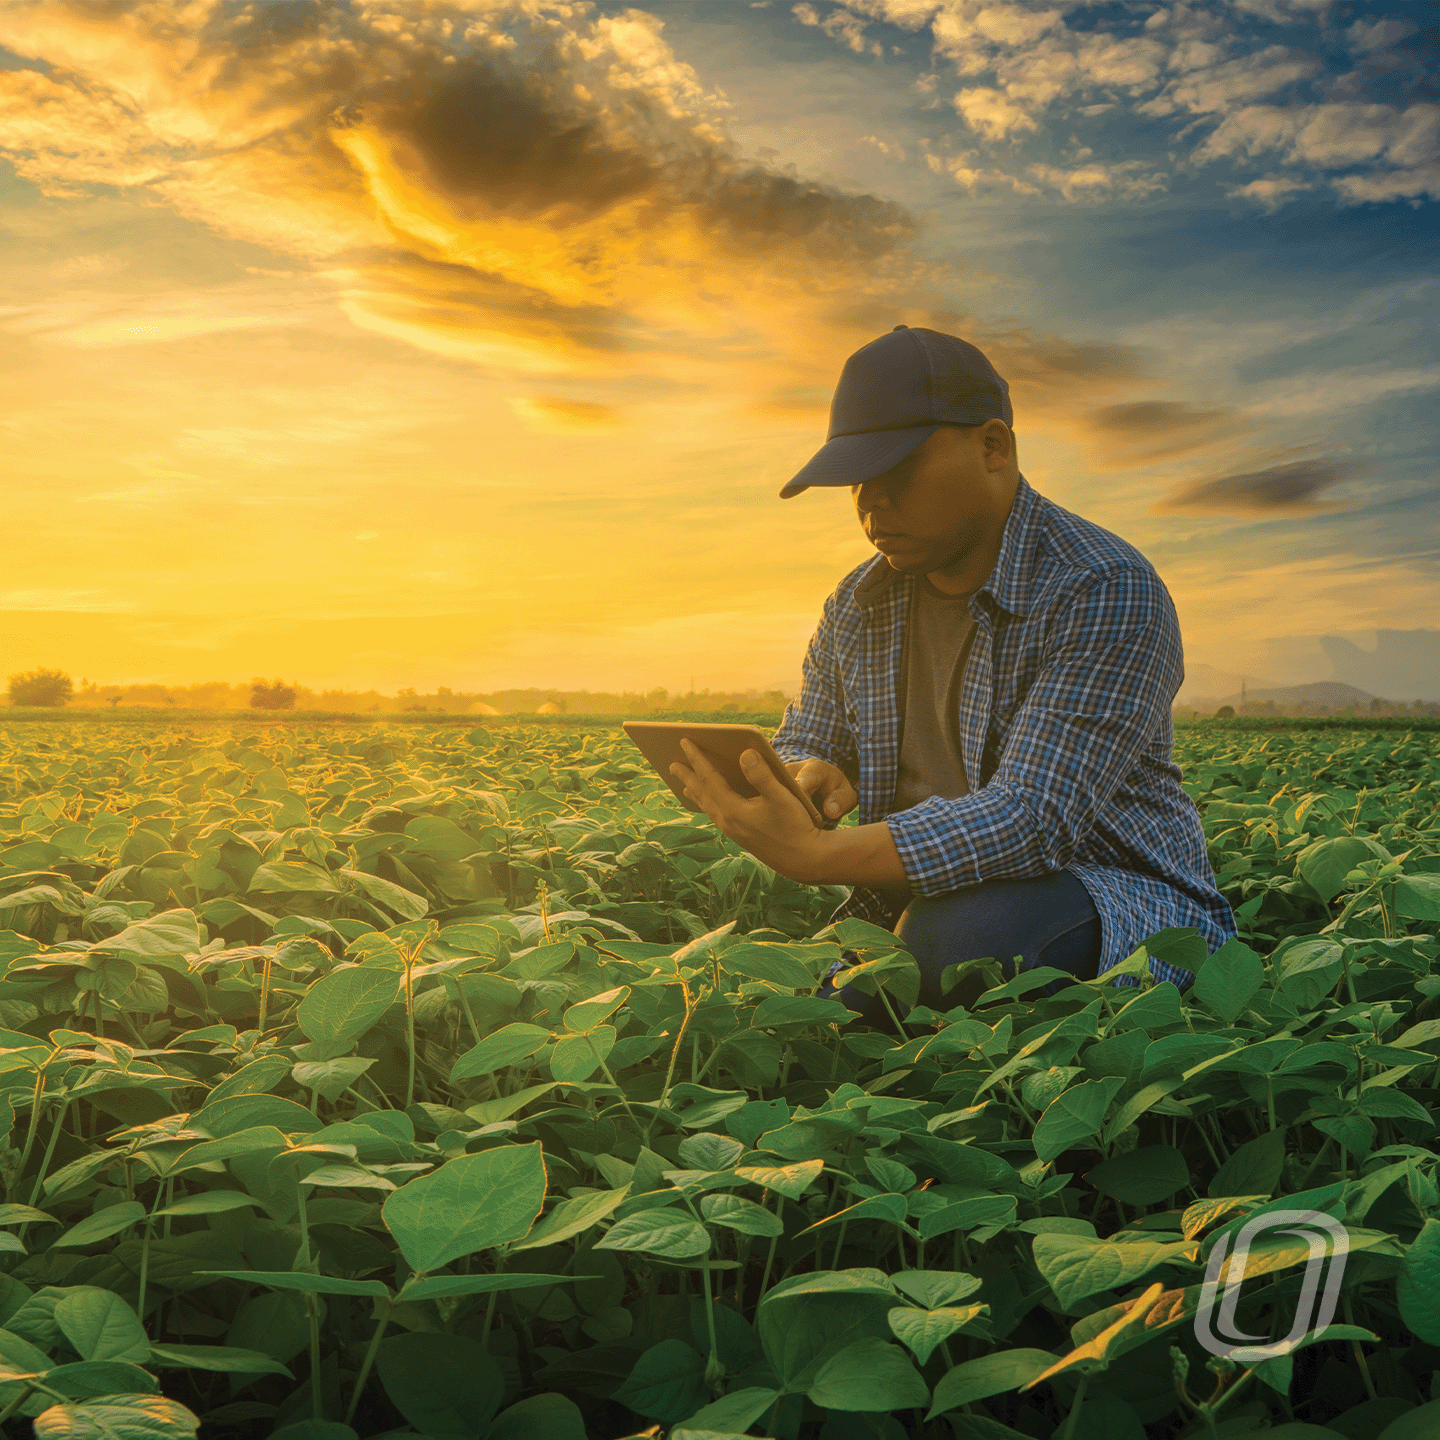 a photo depicting a farmer standing in the middle of a large bean field while looking down at an electronic device